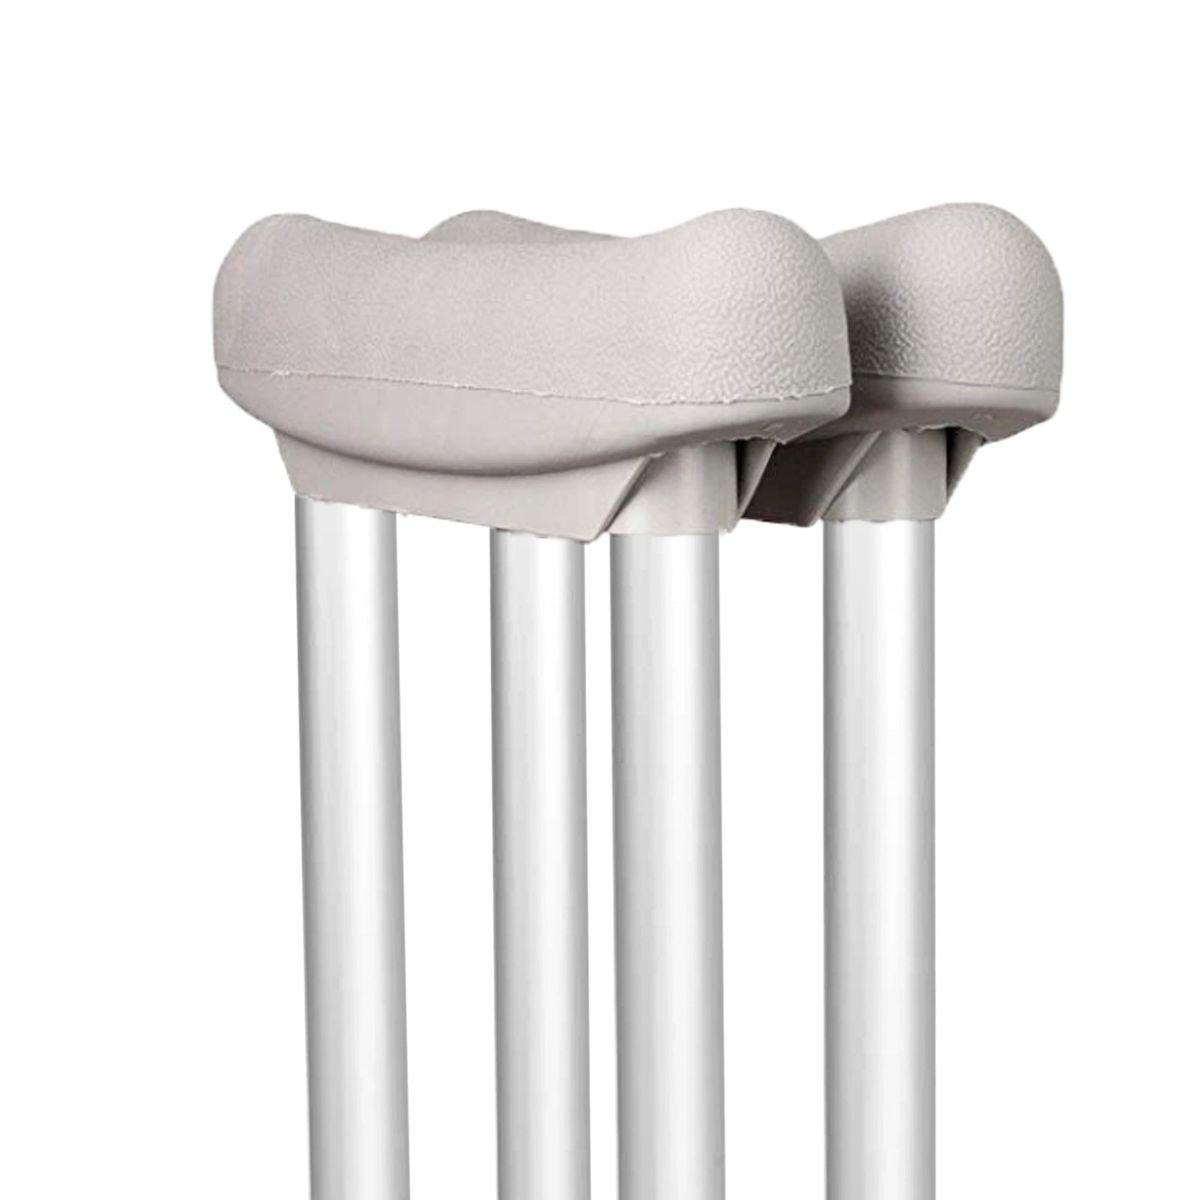 Product Underarm Crutch Pad, Replacement Cane Cushion Tops, Soft Foam Non Slip Support Accessory image